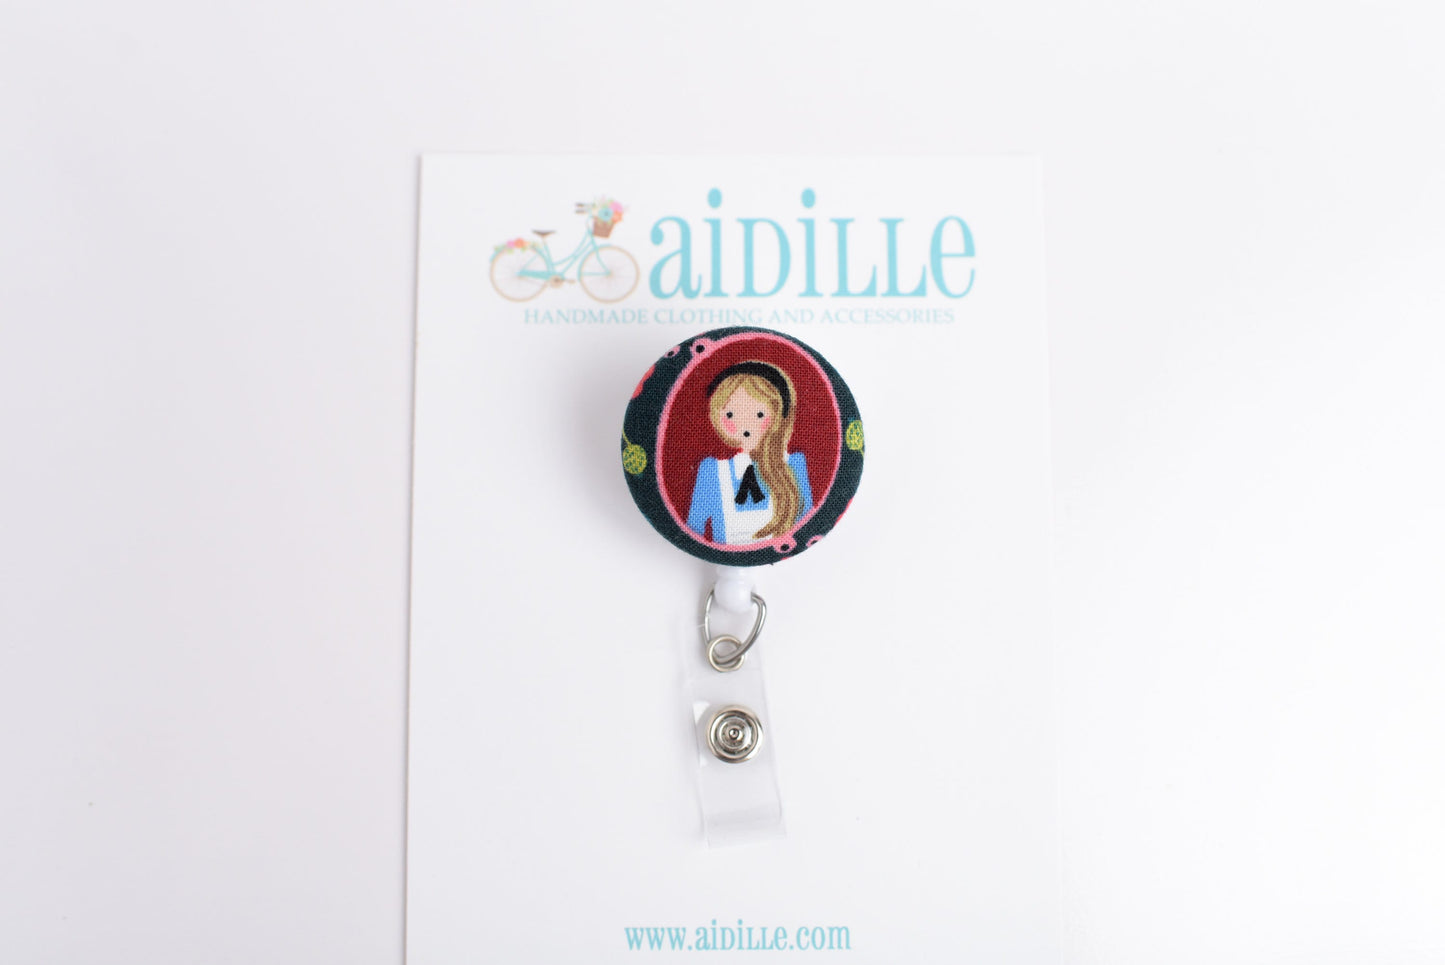 Alice In Wonderland Fabric Button Badge Reel- Choose Alice, White Rabbit, or Queen of Hearts